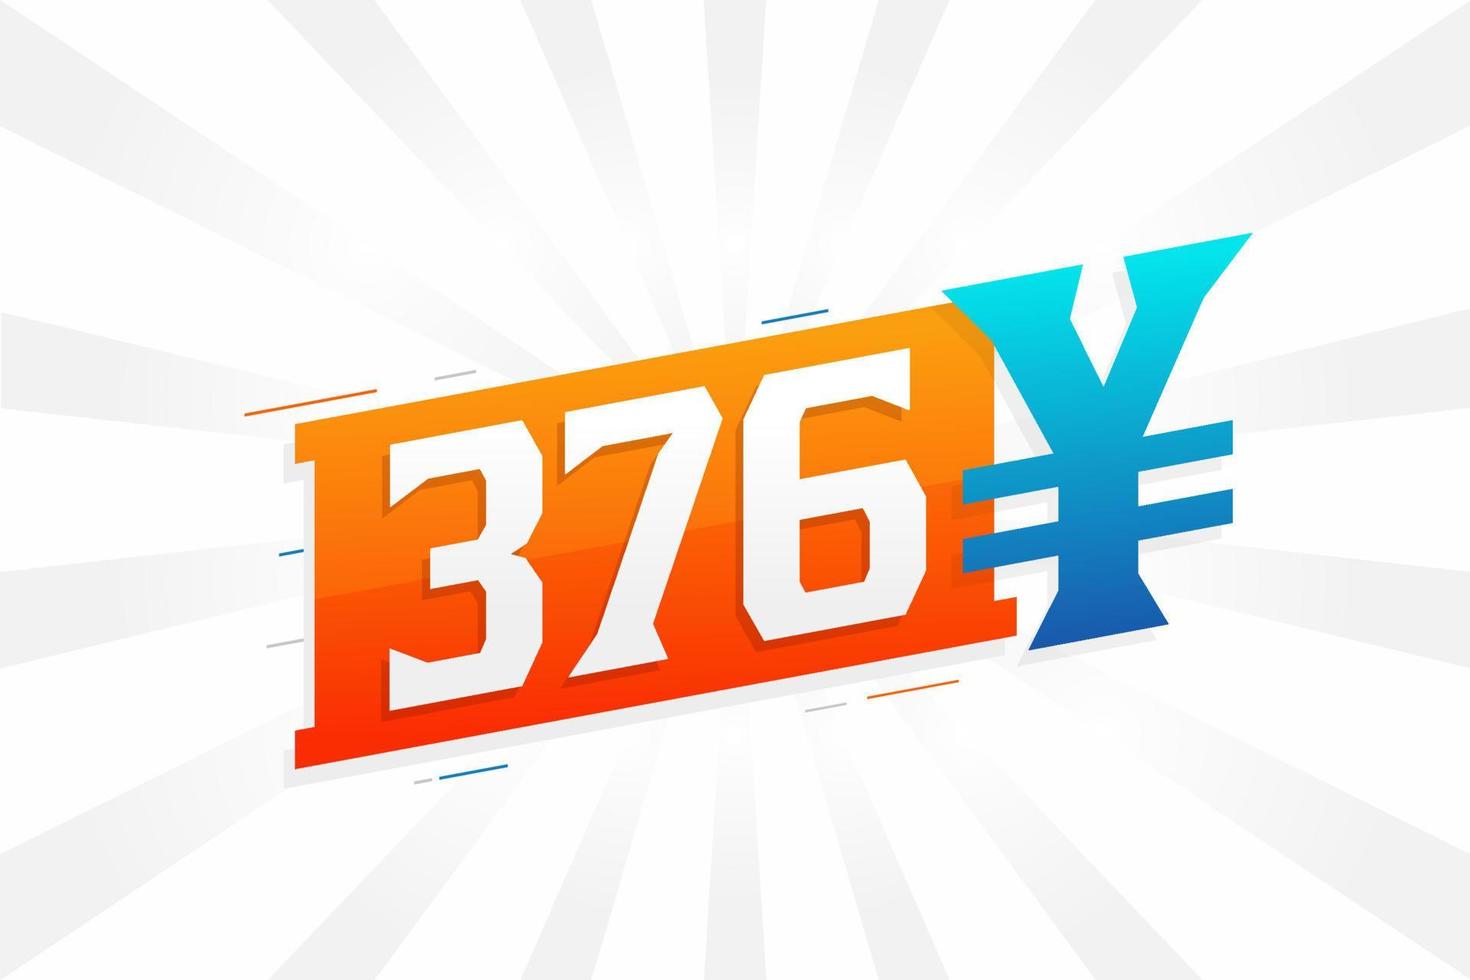 376 Yuan Chinese currency vector text symbol. 376 Yen Japanese currency Money stock vector